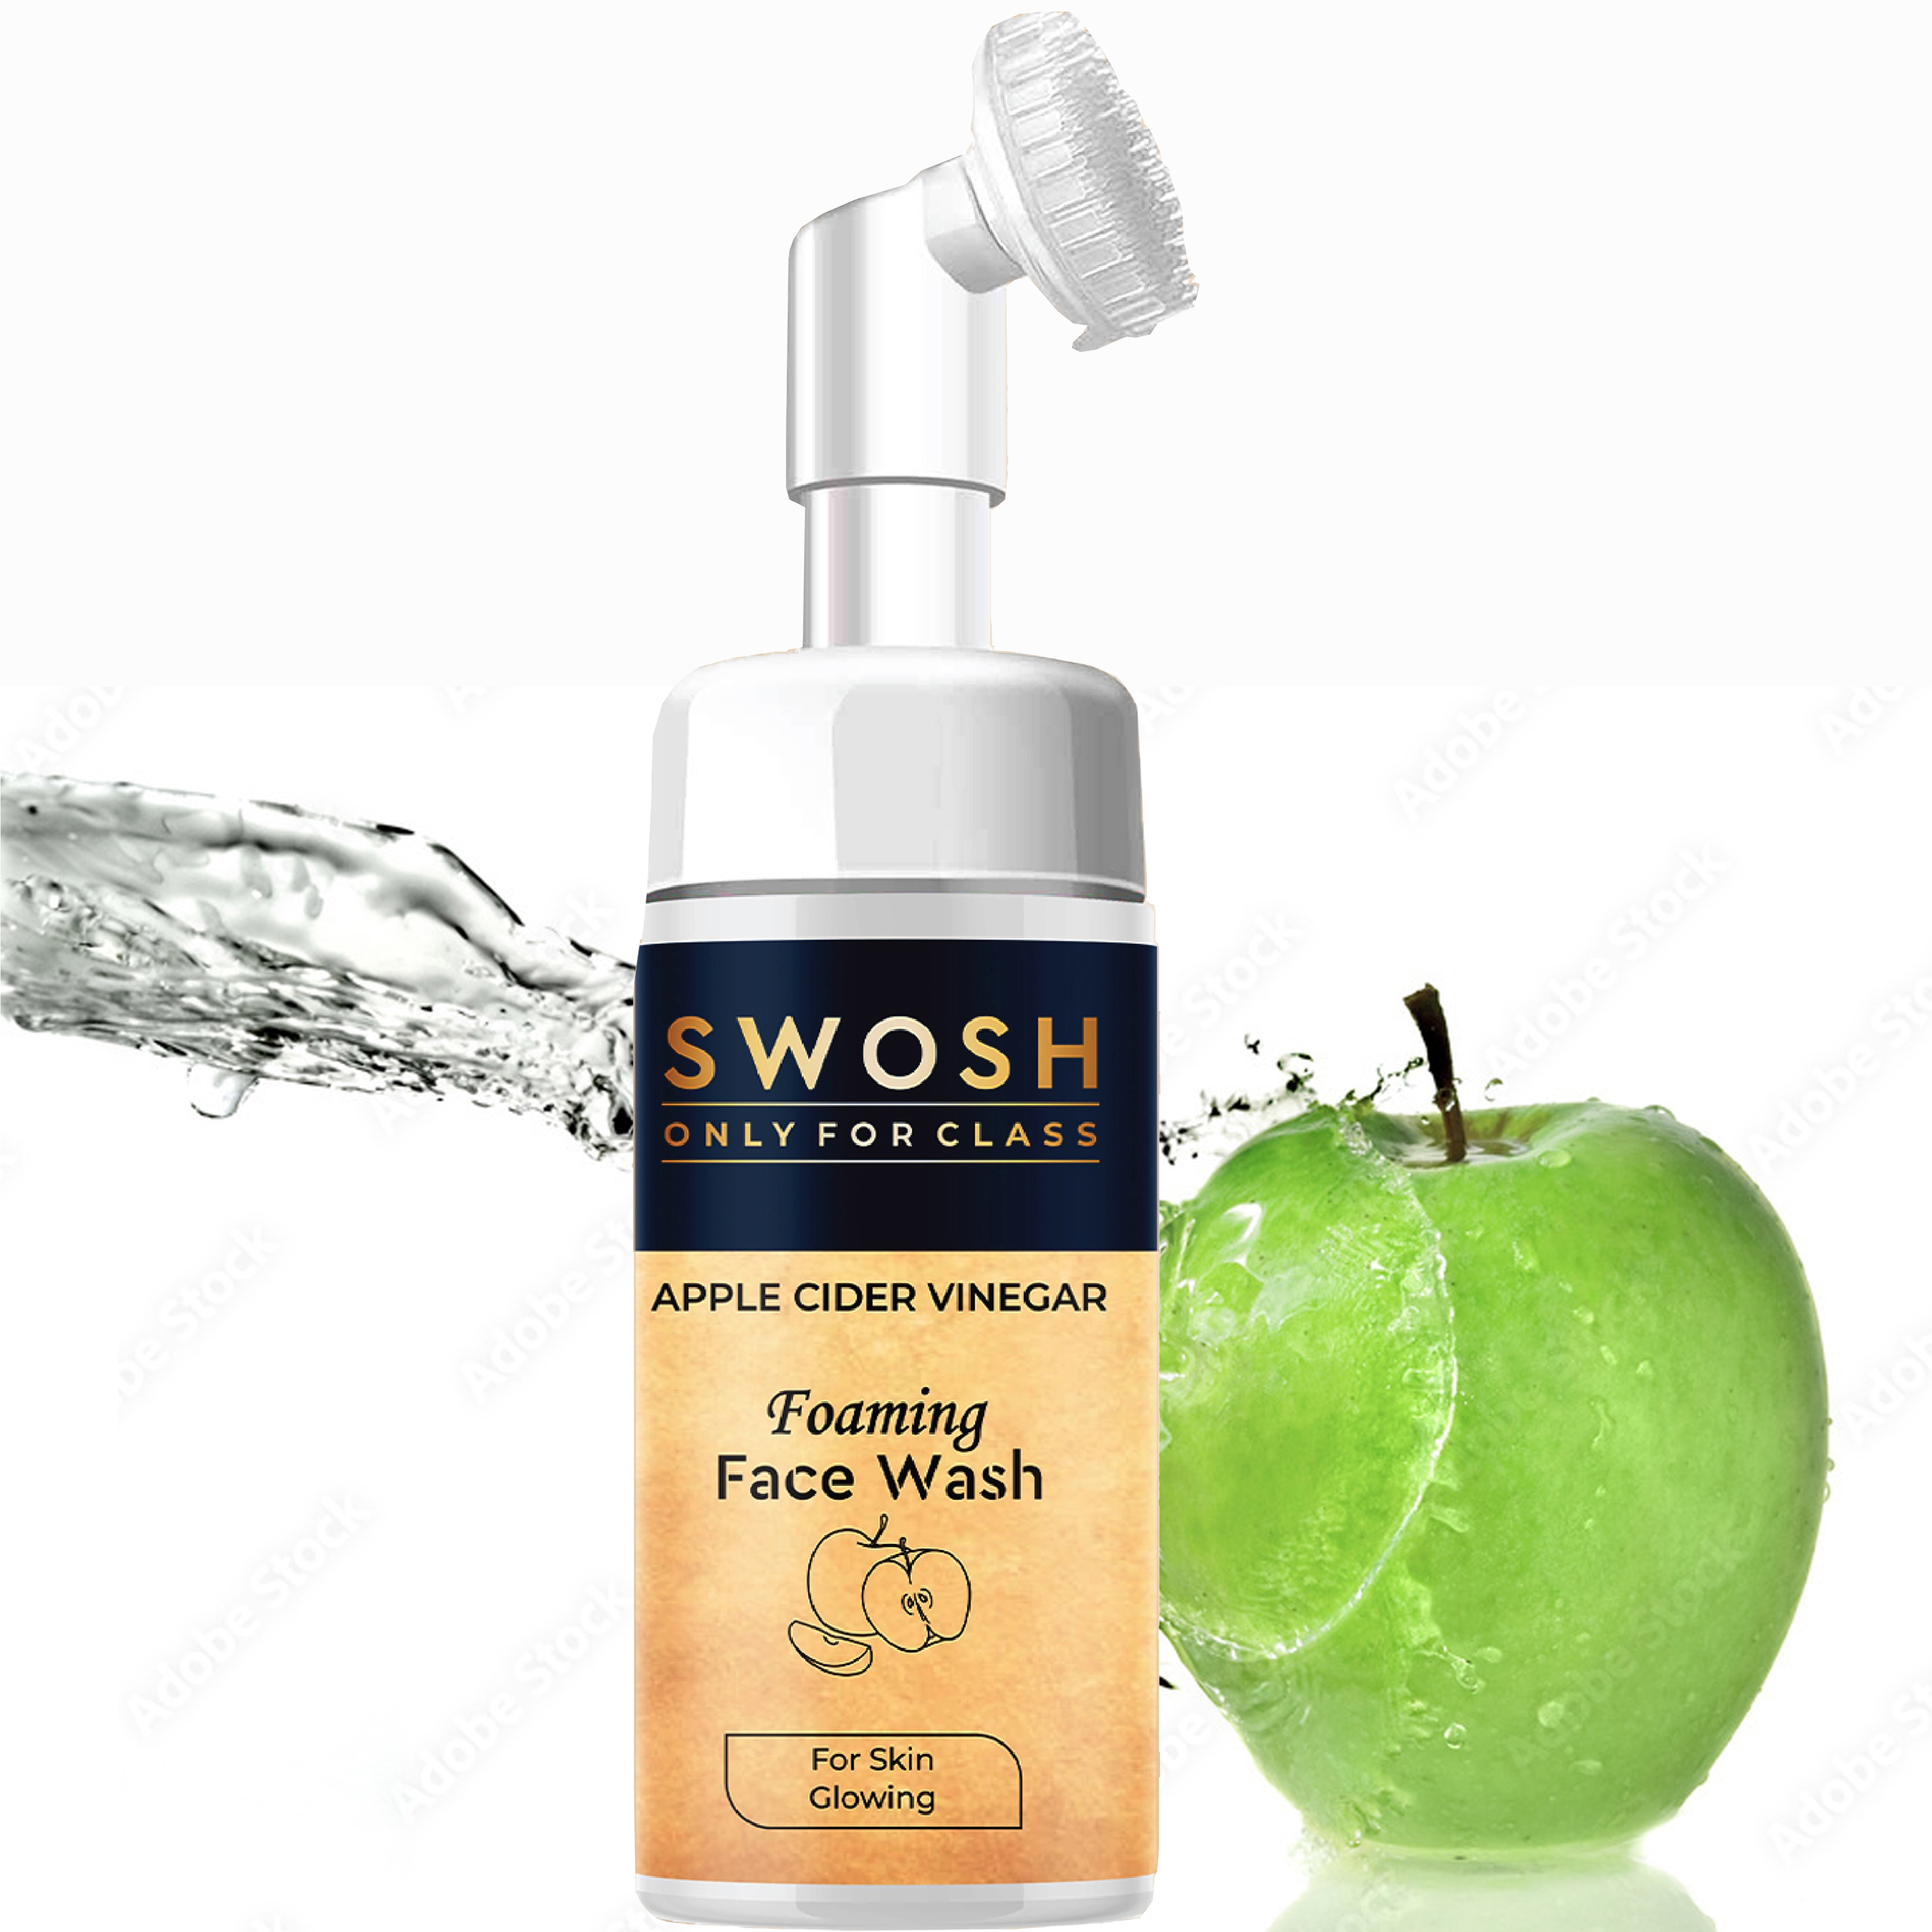 SWOSH Apple Cider vinegar (Apple extract) Foaming Face Wash for Acne Prone & Oily Skin - No Parabens, Sulphate, Silicones & Colour (with Built-in Face Brush), 100 ml